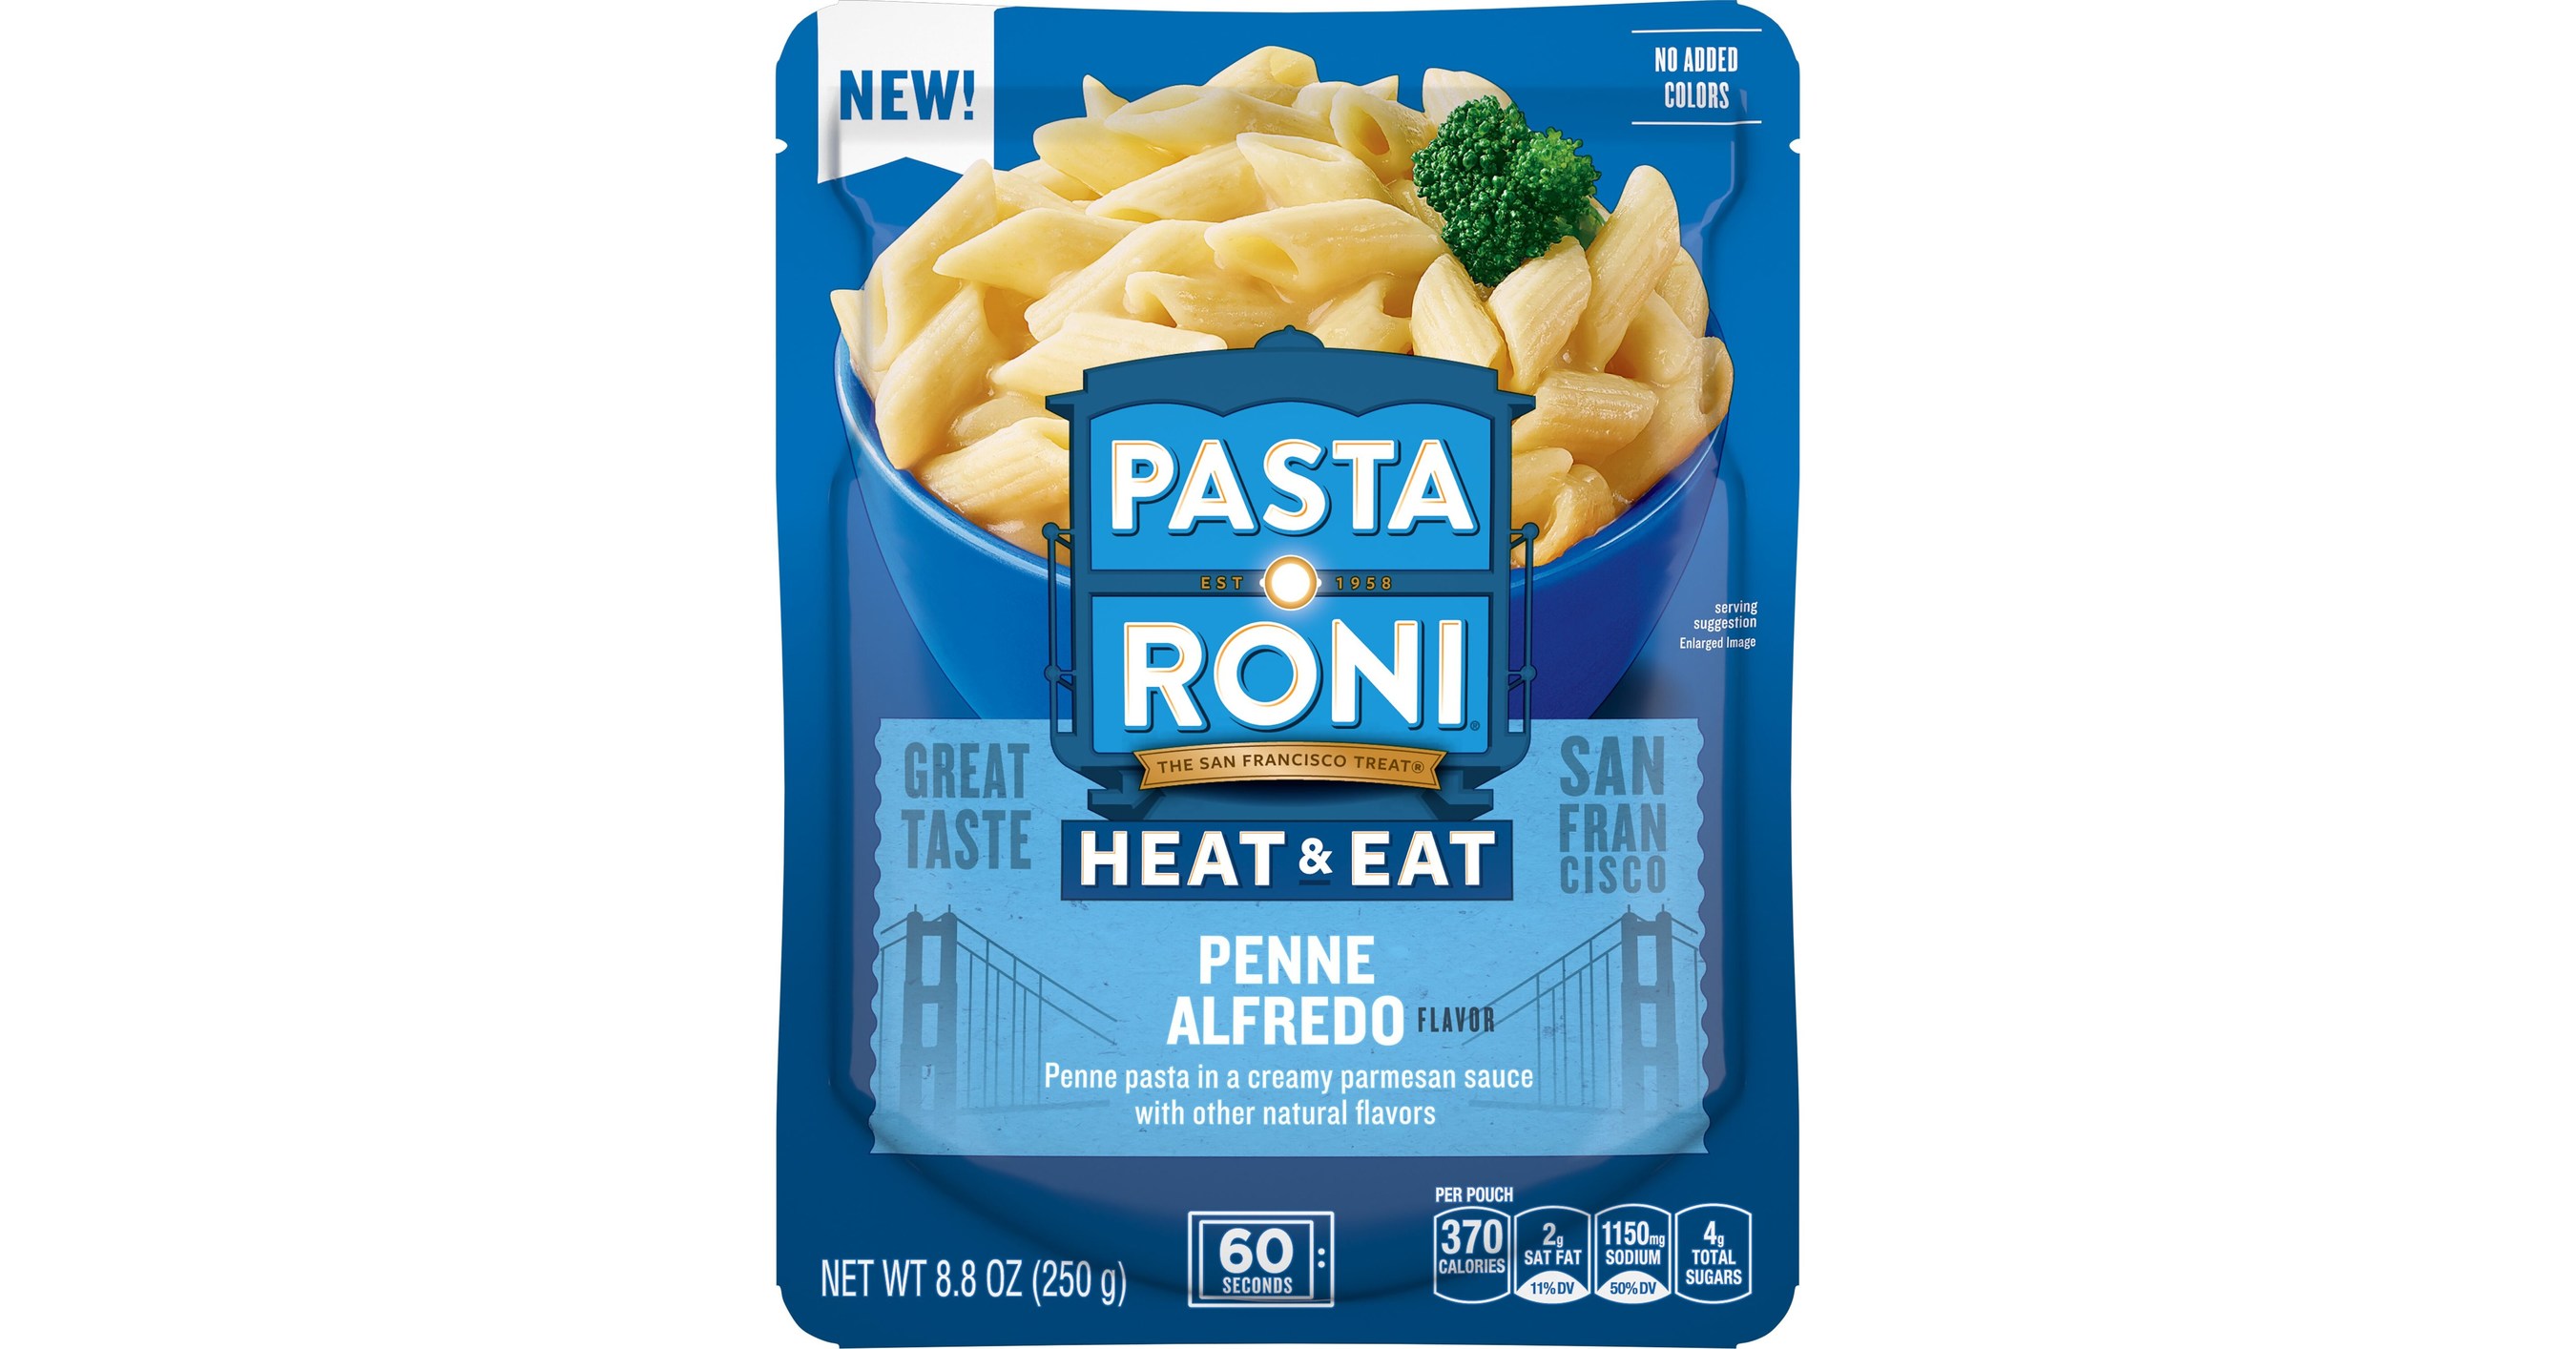 PASTA RONI INTRODUCES NEW HEAT & EAT OFFERINGS TO HELP EASE MEALTIME CHAOS